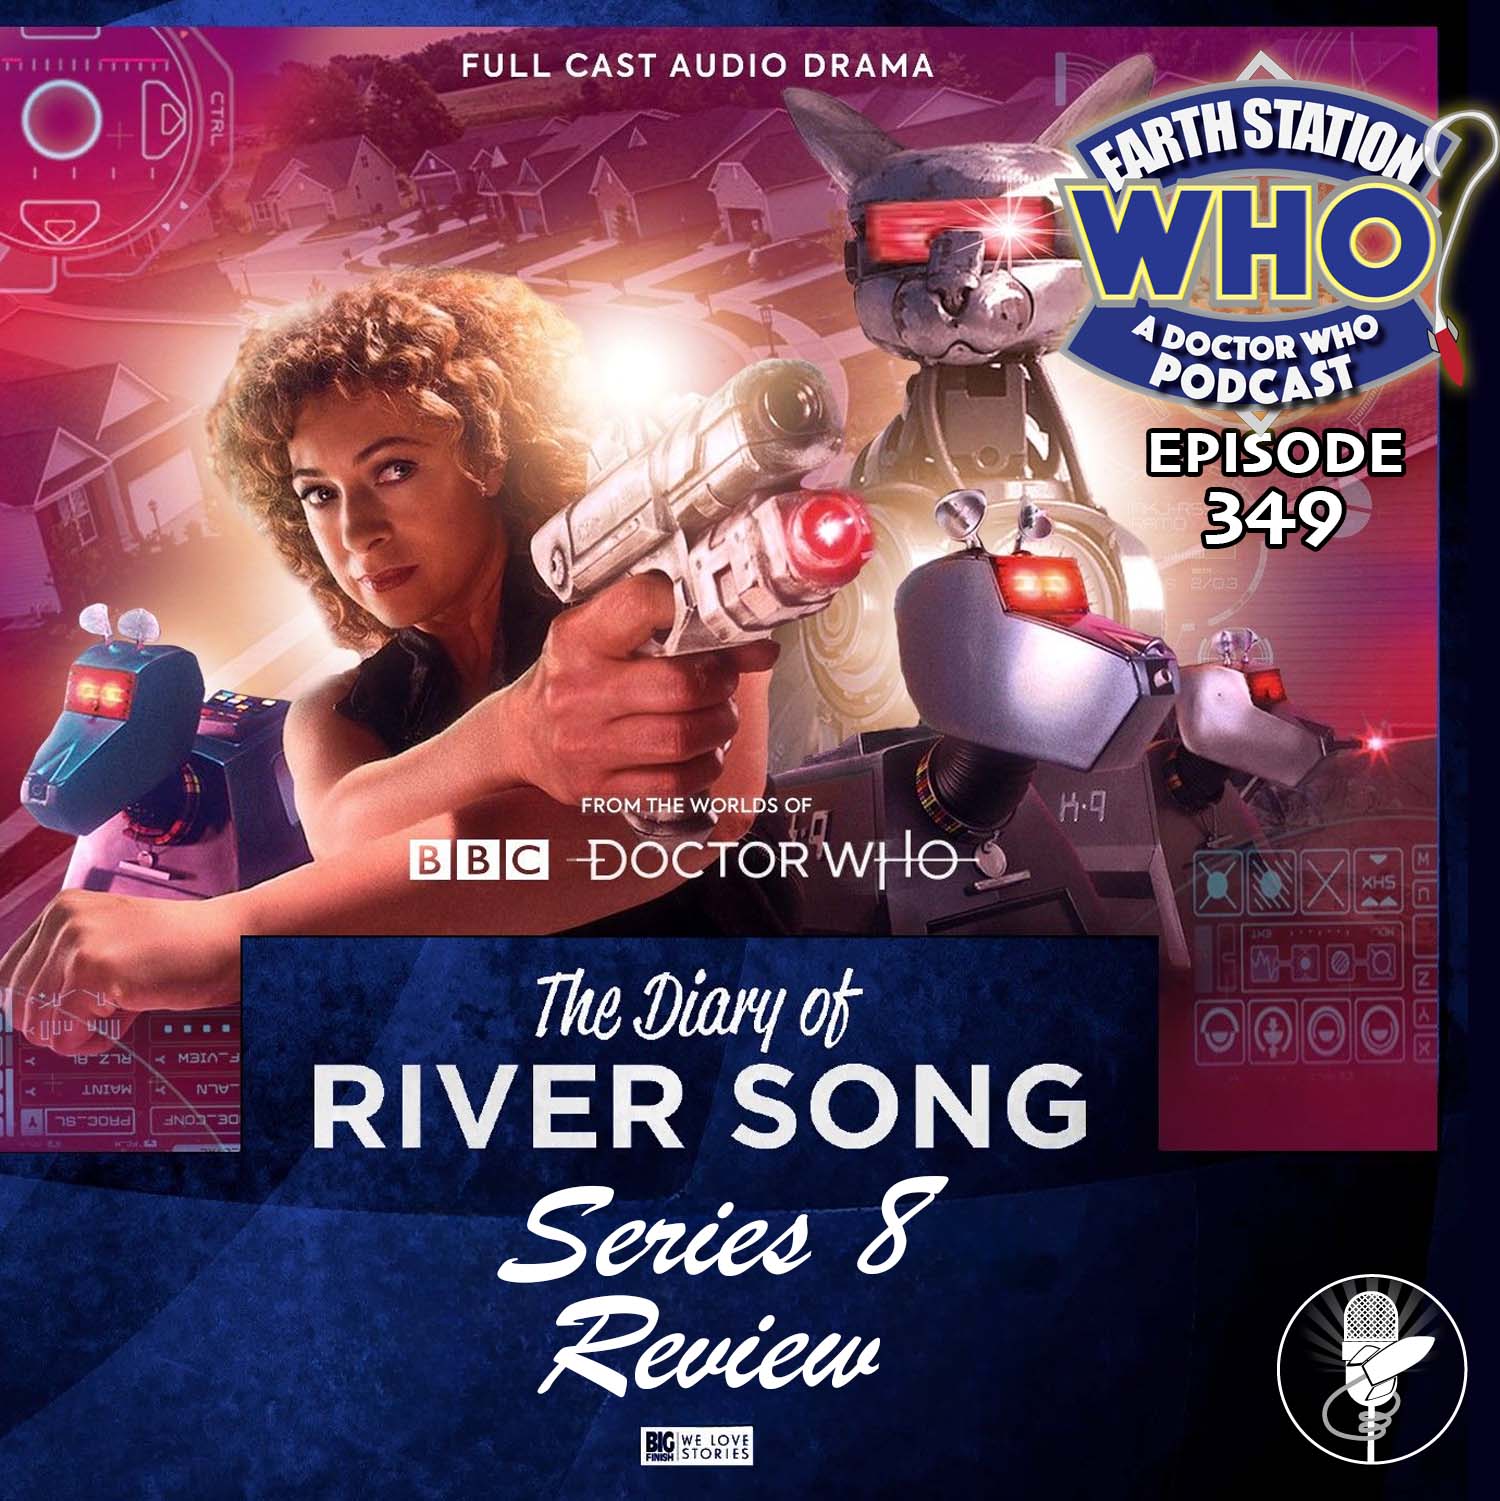 Earth Station Who Ep 349 - The Diary of River Song Series 8